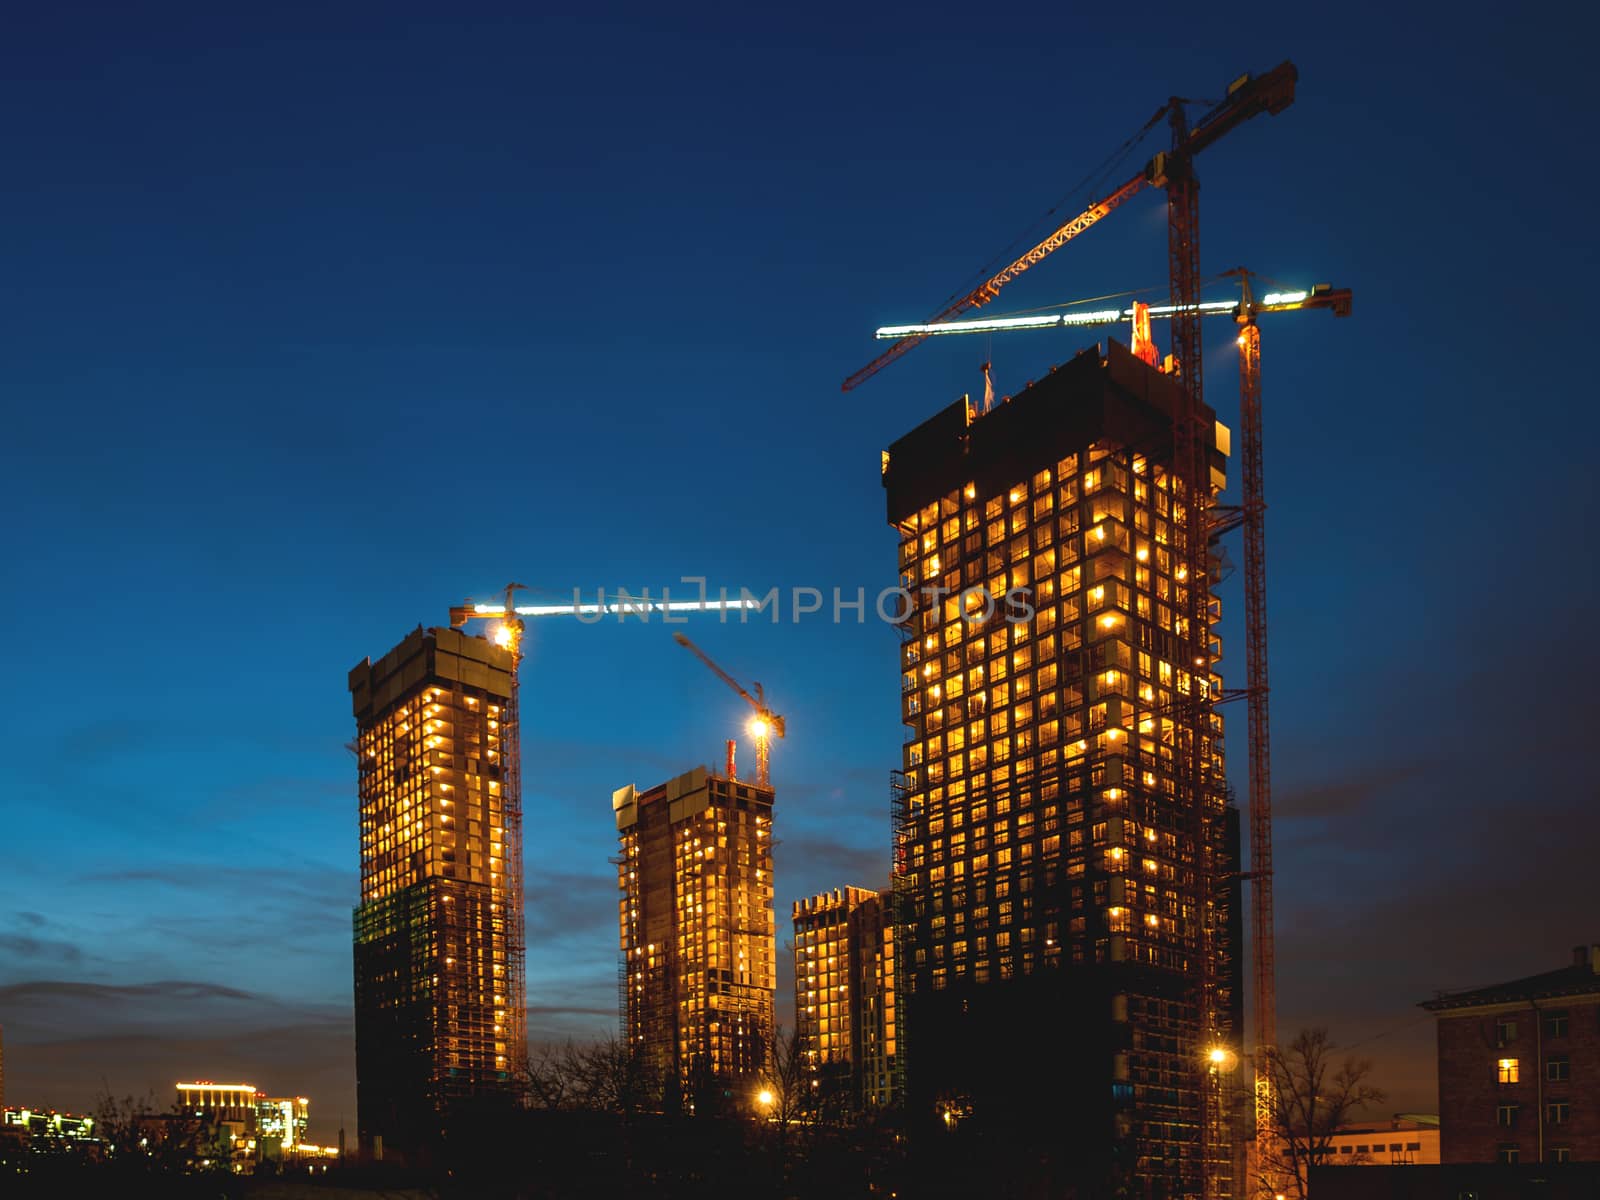 Night view on construction site. Construction cranes near future high-rise apartment building. Moscow, Russia. by aksenovko